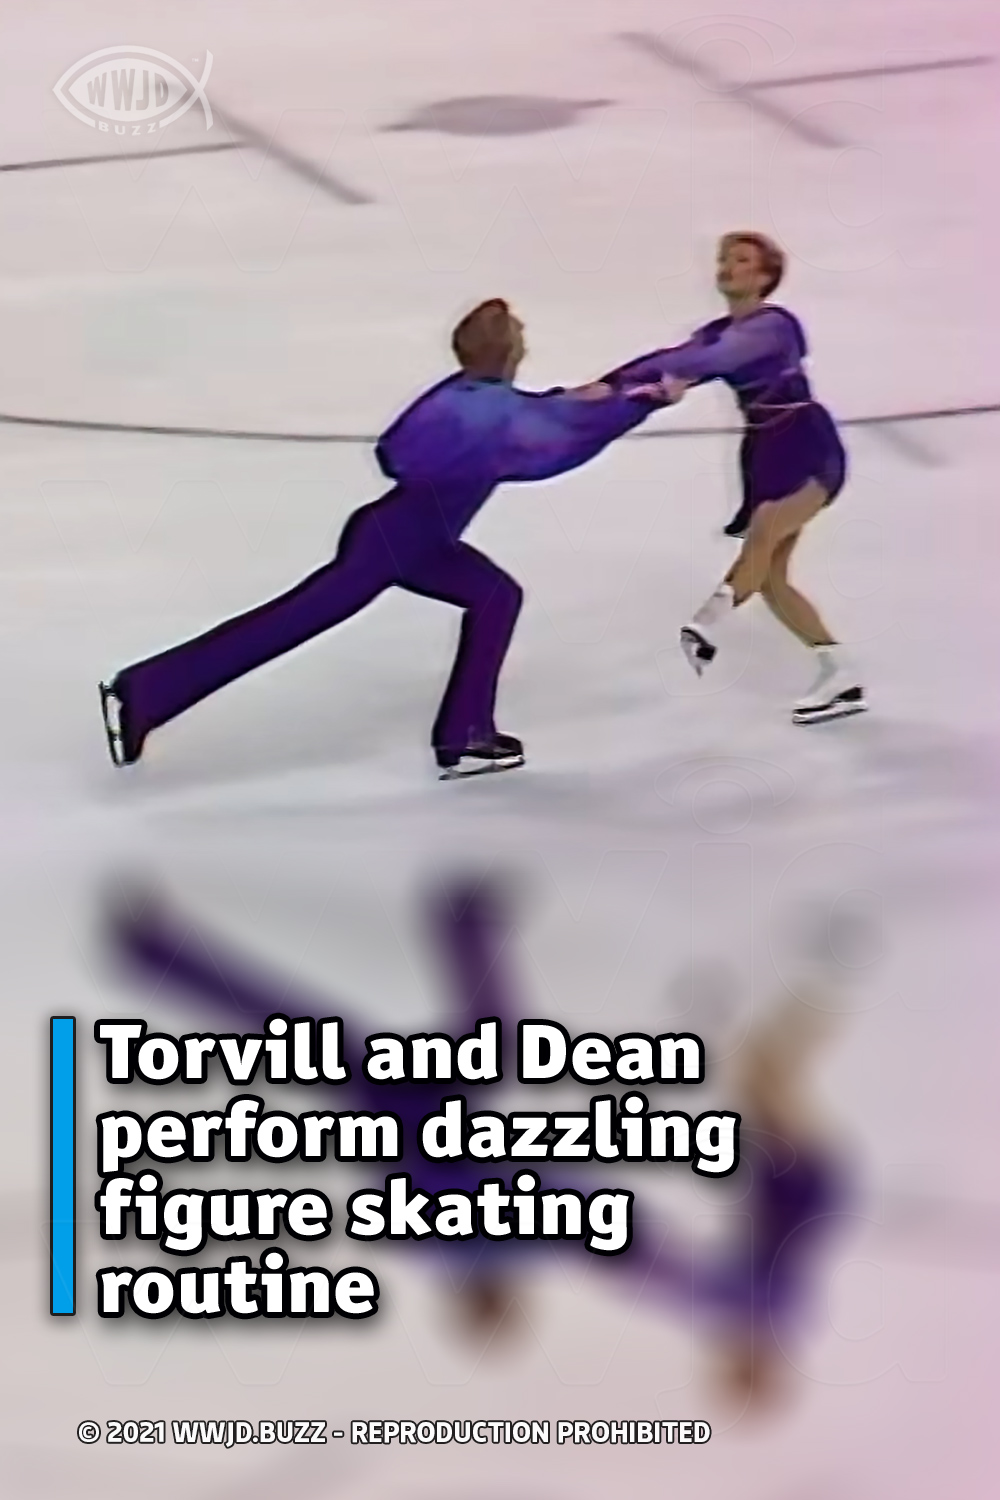 Torvill and Dean perform dazzling figure skating routine